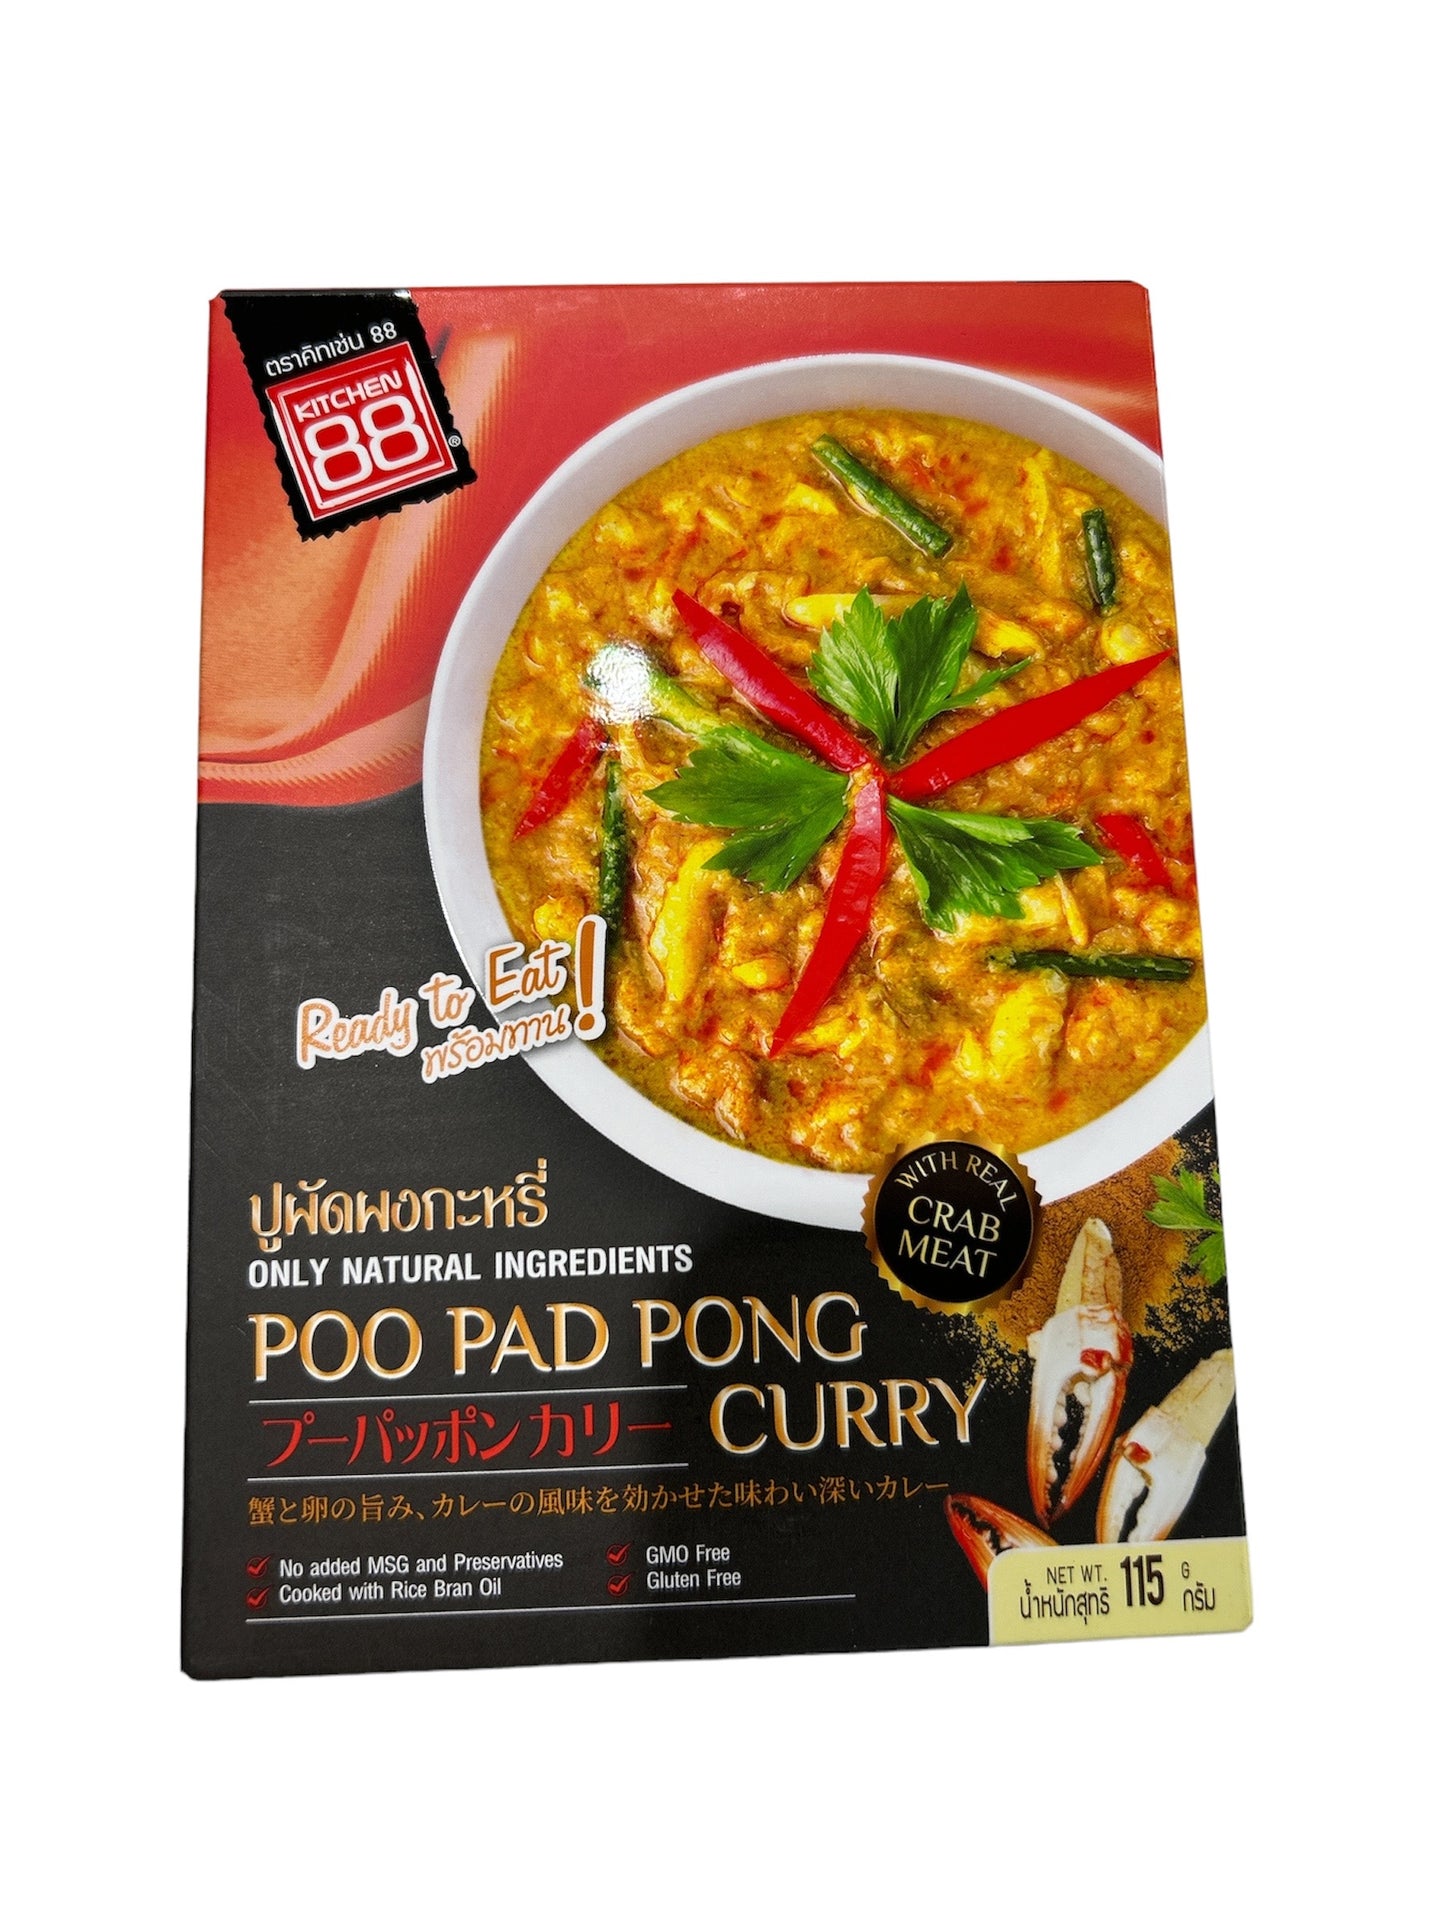 Kitchen88 Poo Pad Pong Curry 115g